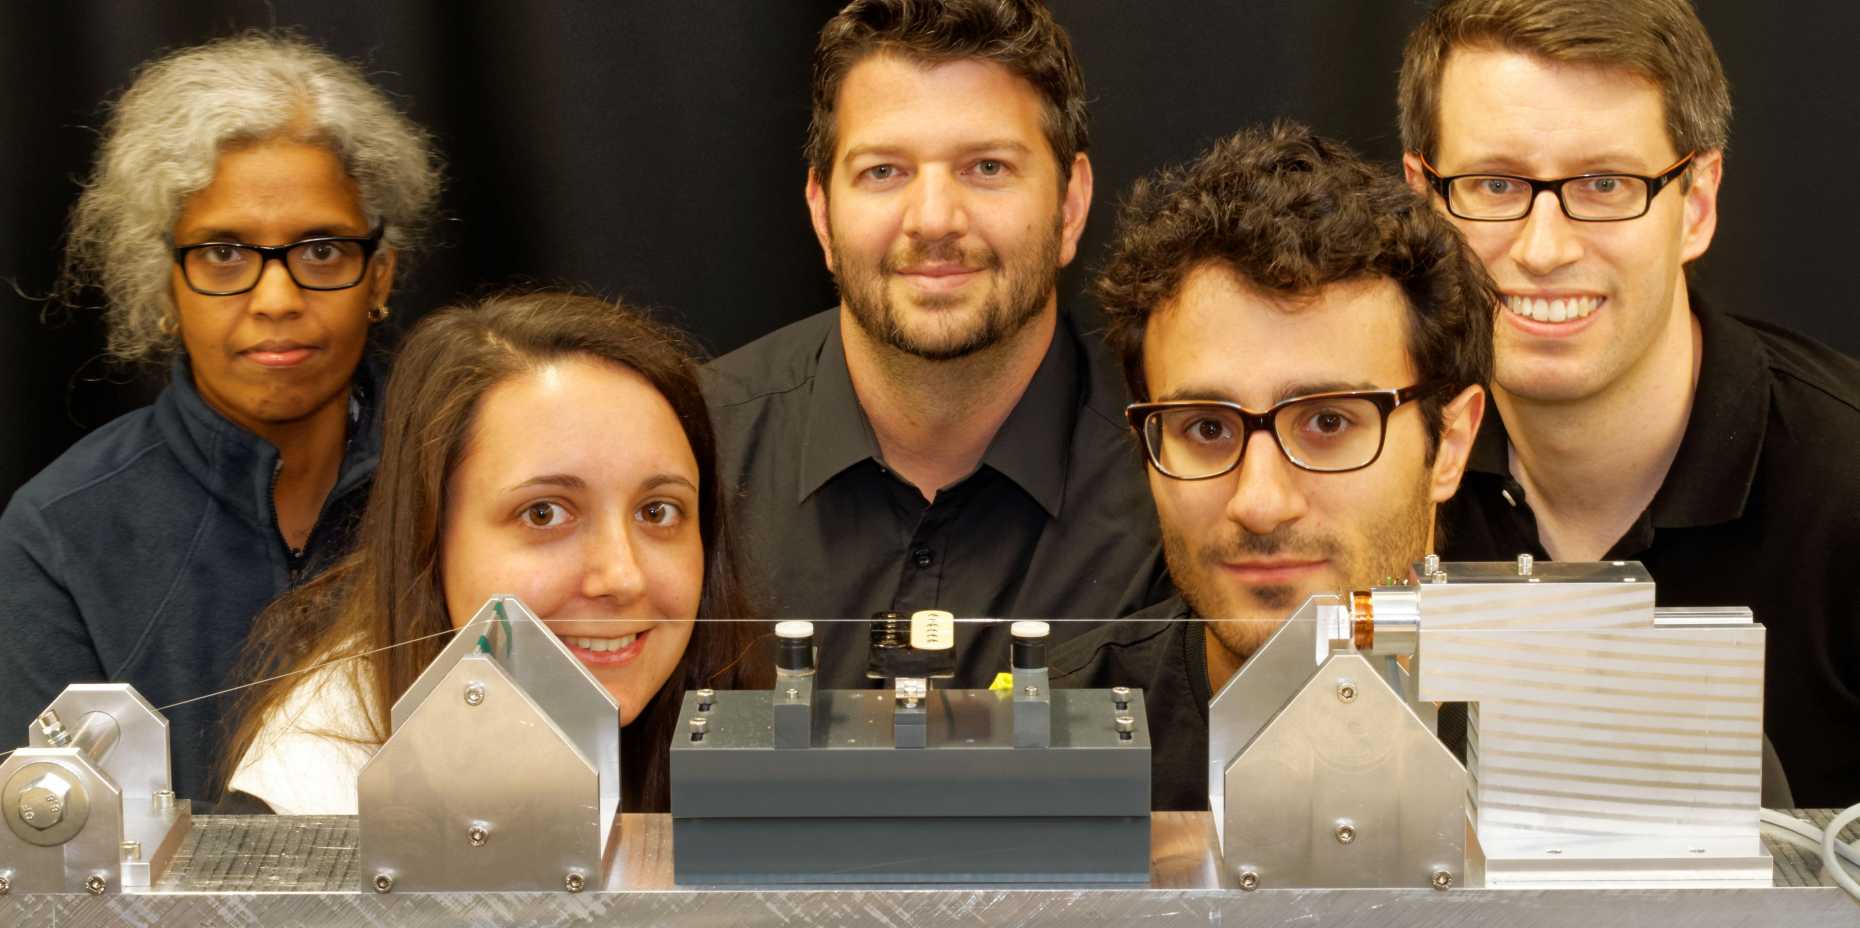 A close exchange of experimental and theoretical physics: (from left to right) theoretical physicist Chitra Ramasubramanian, master student experiment Anina Leuch, theoretical physicist Oded Zilberberg, PhD student theoretical physics Luca Papariello, experimental physicist Alexander Eichler (Photo: ETH Zurich / Alexander Eichler)